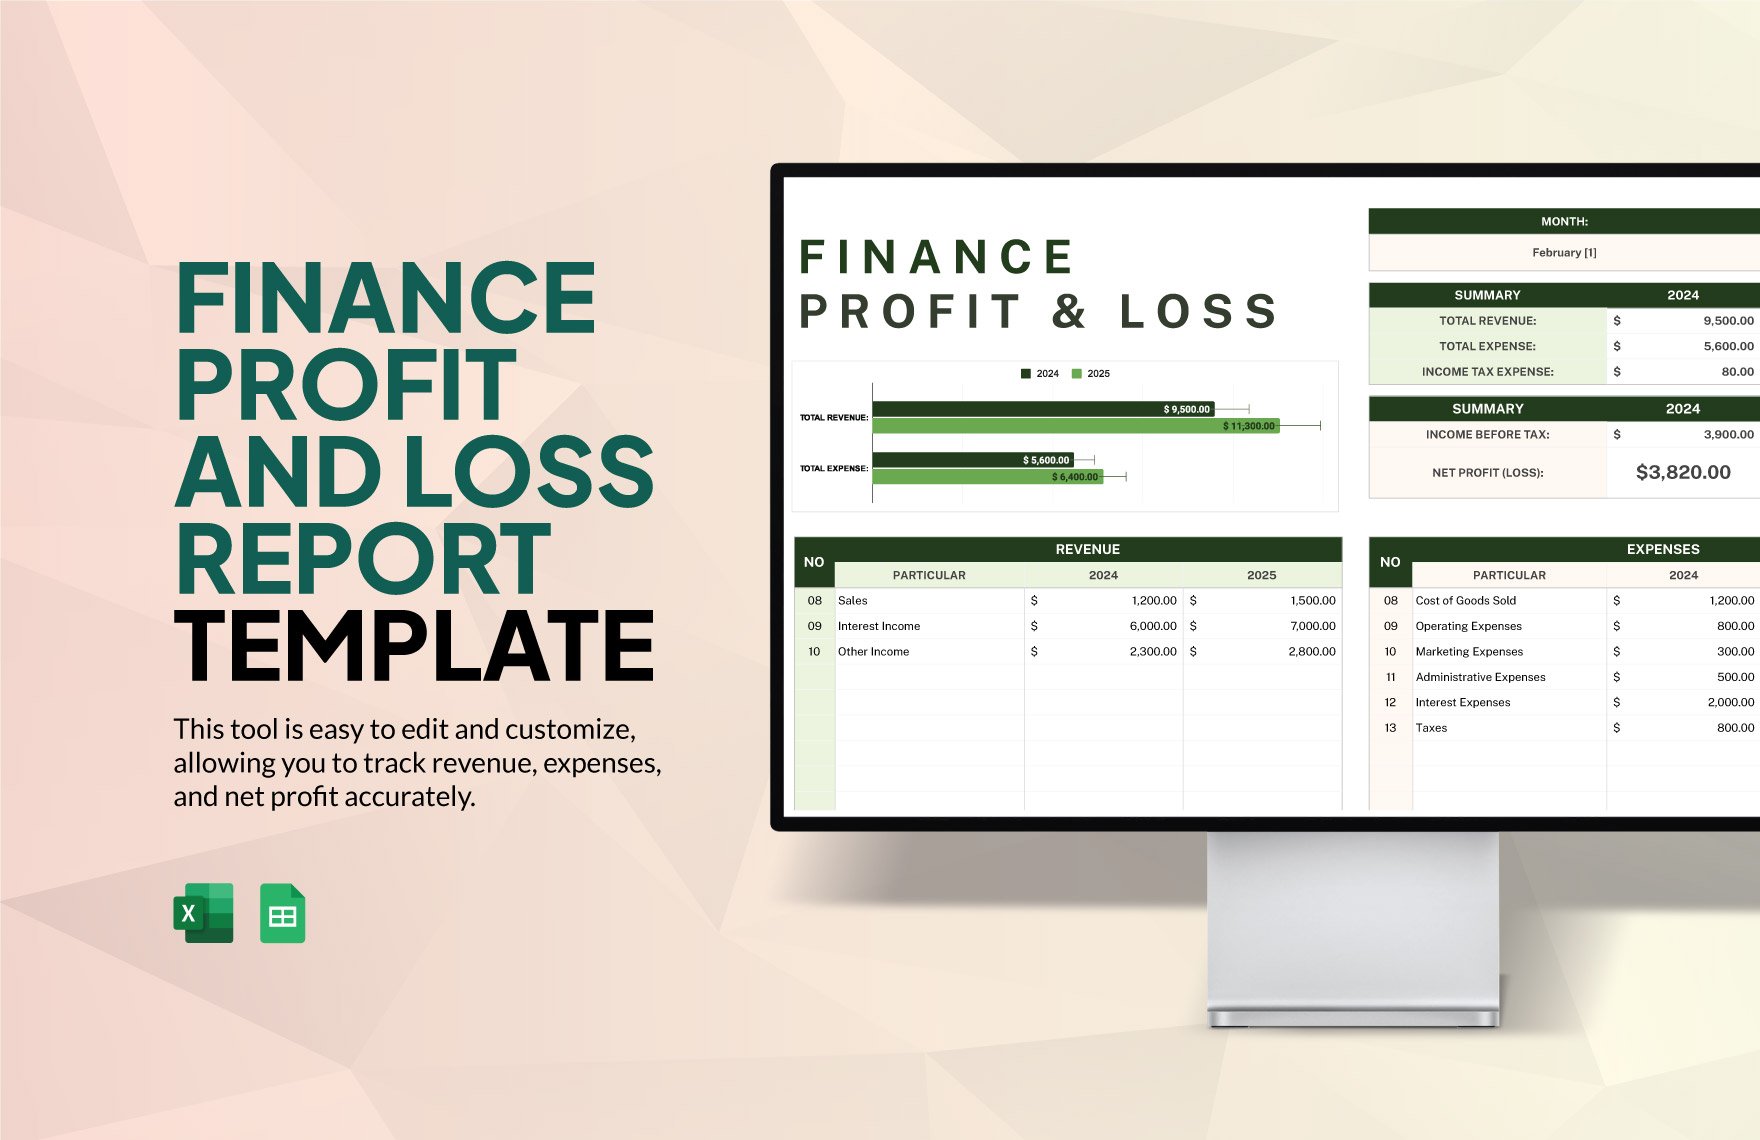 Finance Profit and Loss Report Template in Excel, Google Sheets